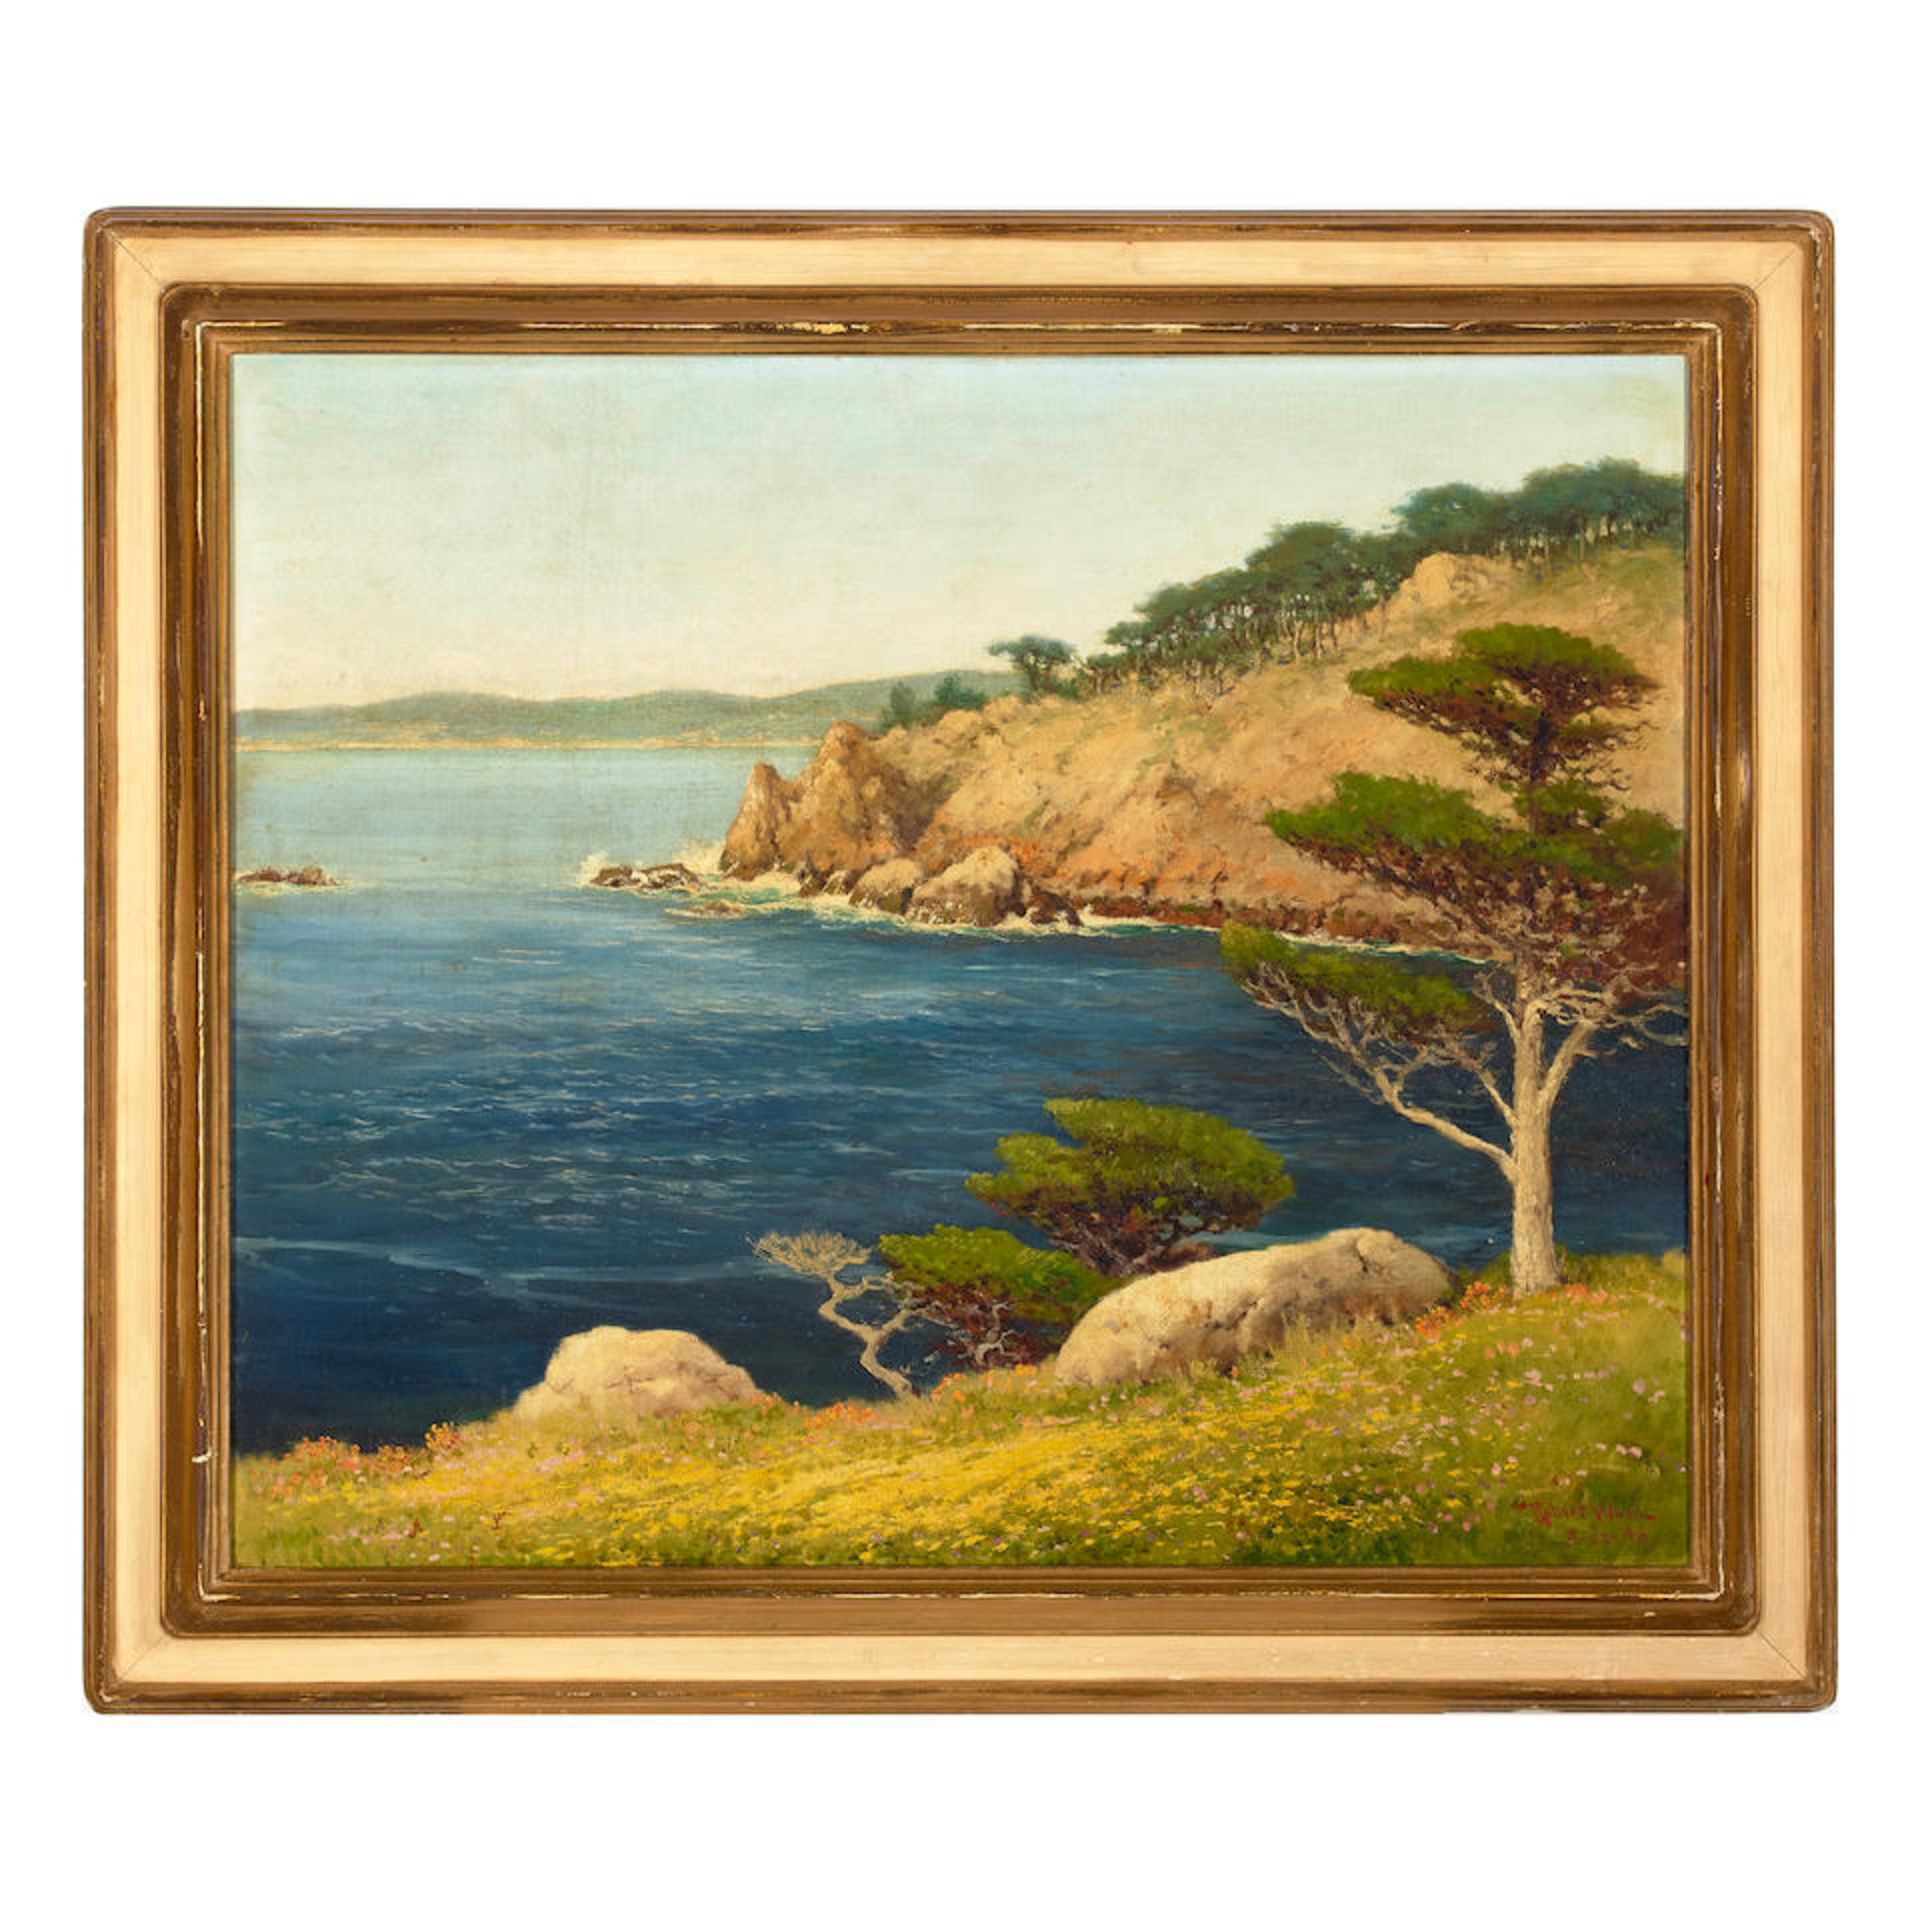 Robert William Wood (1889-1979) Carmel-by-the-Sea 25 x 30 in. framed 30 1/2 x 35 1/2 in. - Image 3 of 4